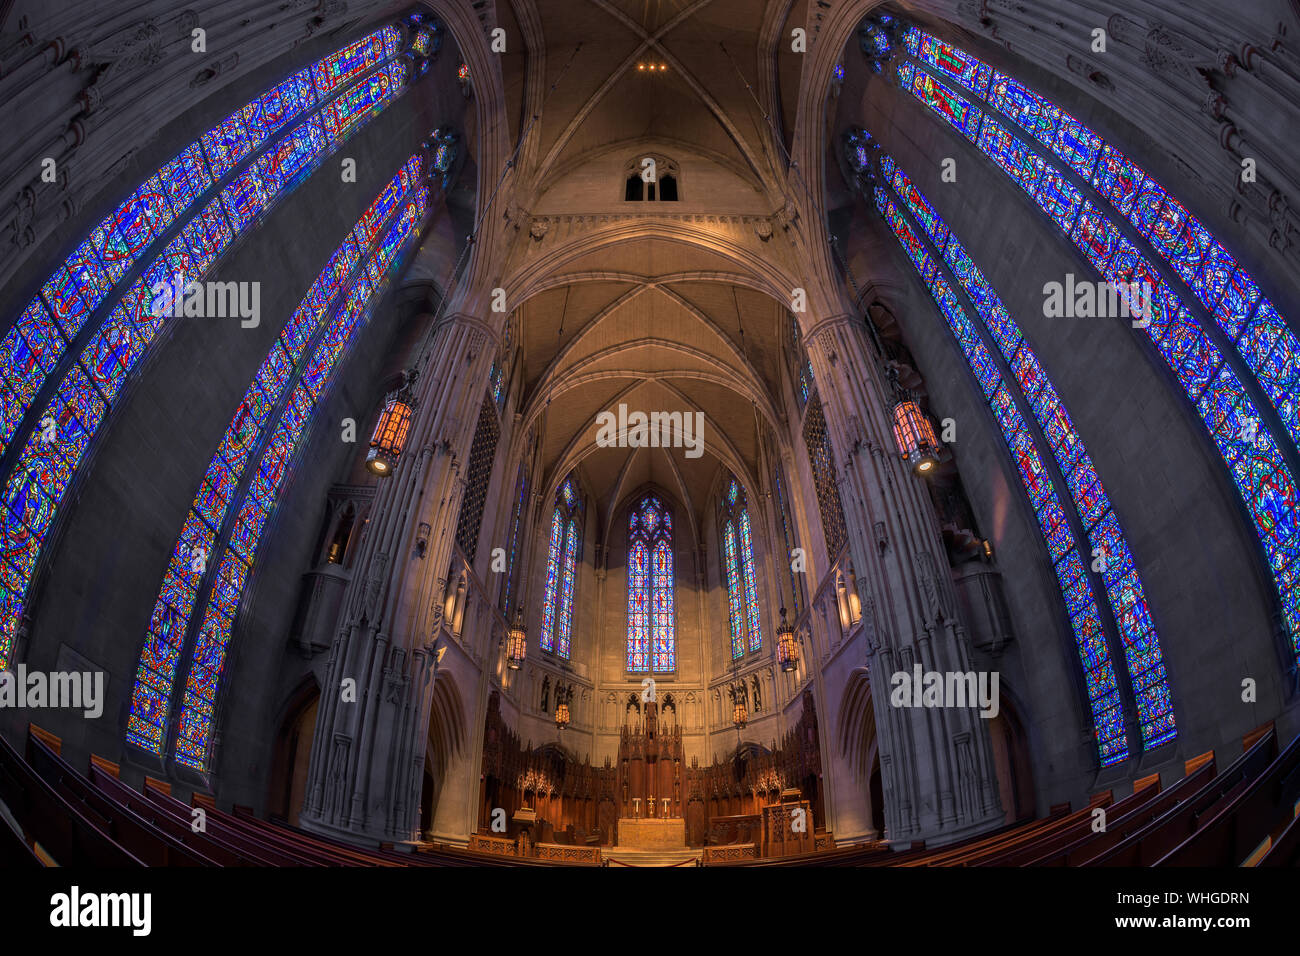 Interior of the historic Heinz Memorial Chapel on the campus of the University of Pittsburgh in Pittsburgh, Pennsylvania Stock Photo